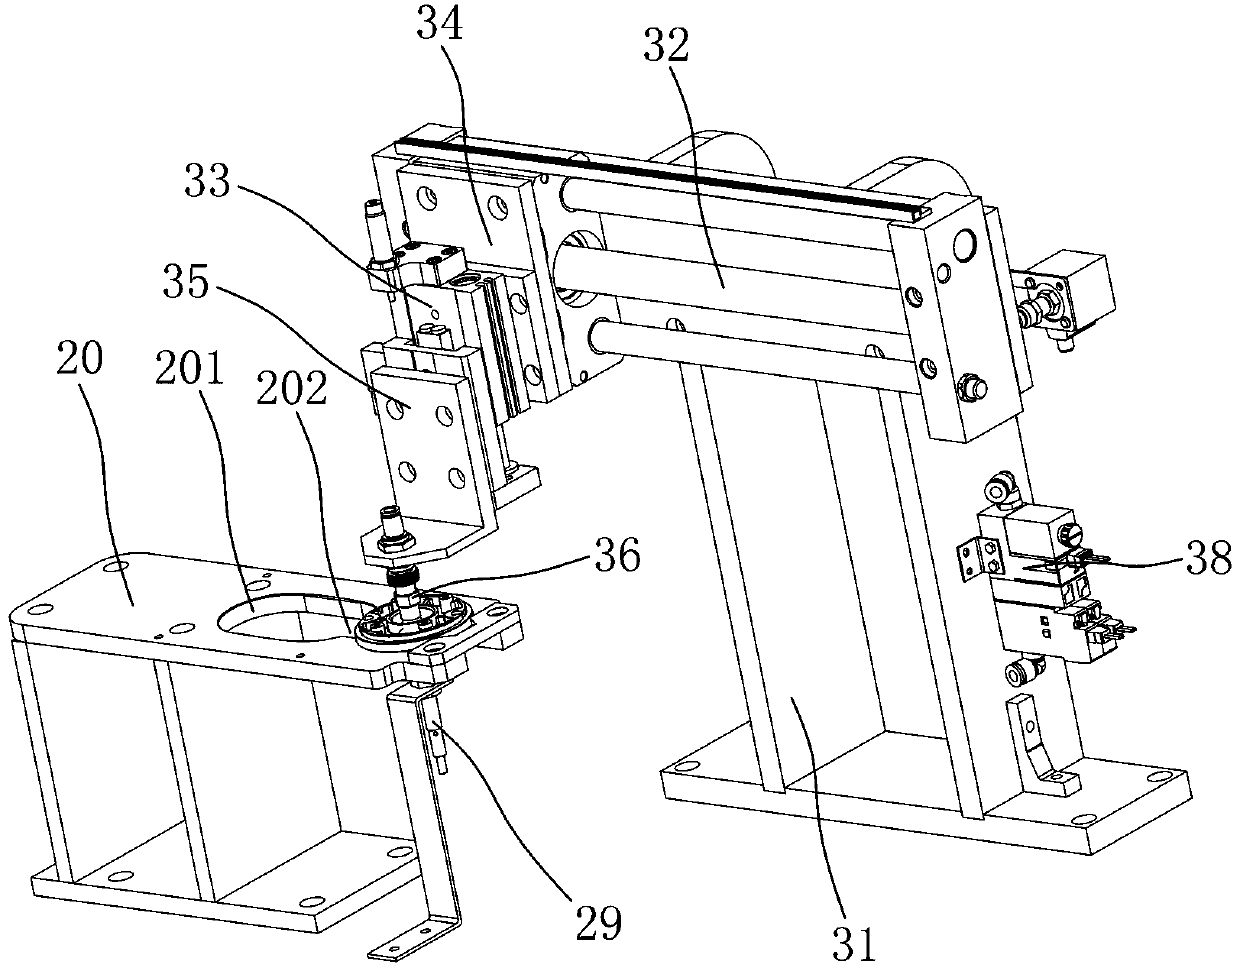 Automatic press-fitting device for motor end cover and bearing